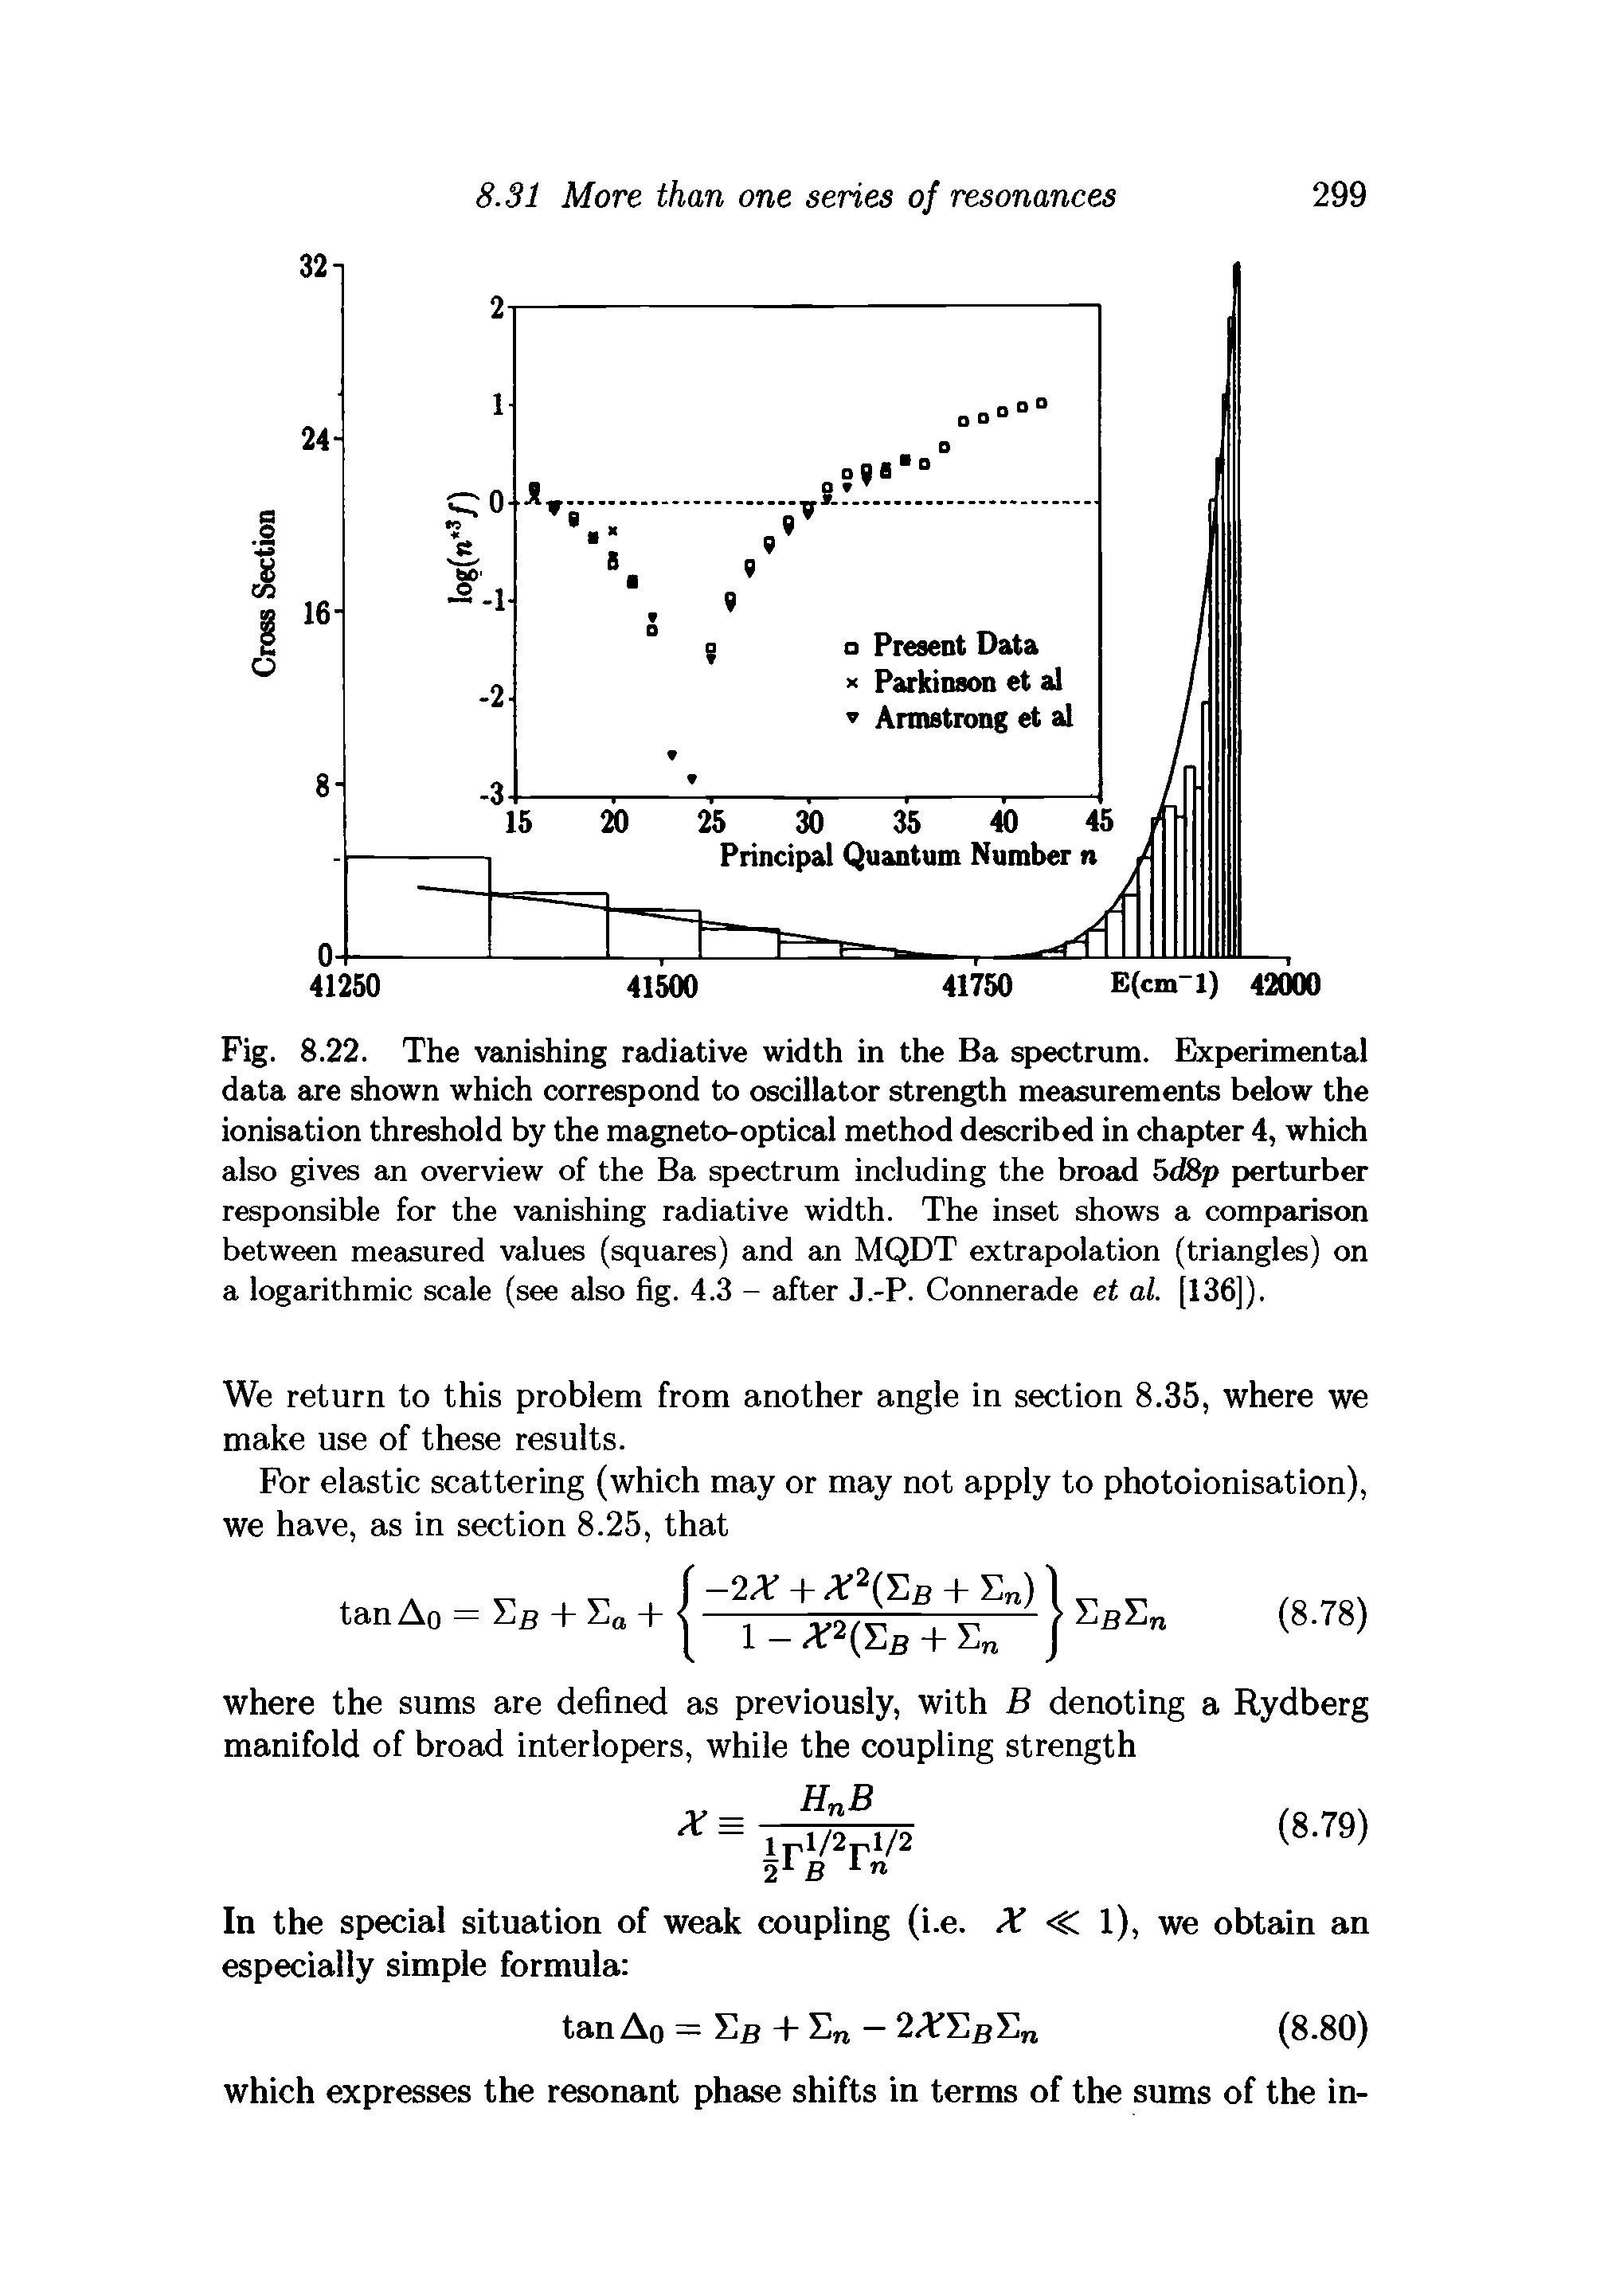 Fig. 8.22. The vanishing radiative width in the Ba spectrum. Experimental data are shown which correspond to oscillator strength measurements below the ionisation threshold by the magneto-optical method described in chapter 4, which also gives an overview of the Ba spectrum including the broad 5d8p perturber responsible for the vanishing radiative width. The inset shows a comparison between measured values (squares) and an MQDT extrapolation (triangles) on a logarithmic scale (see also fig. 4.3 - after J.-P. Connerade et al. [136]).